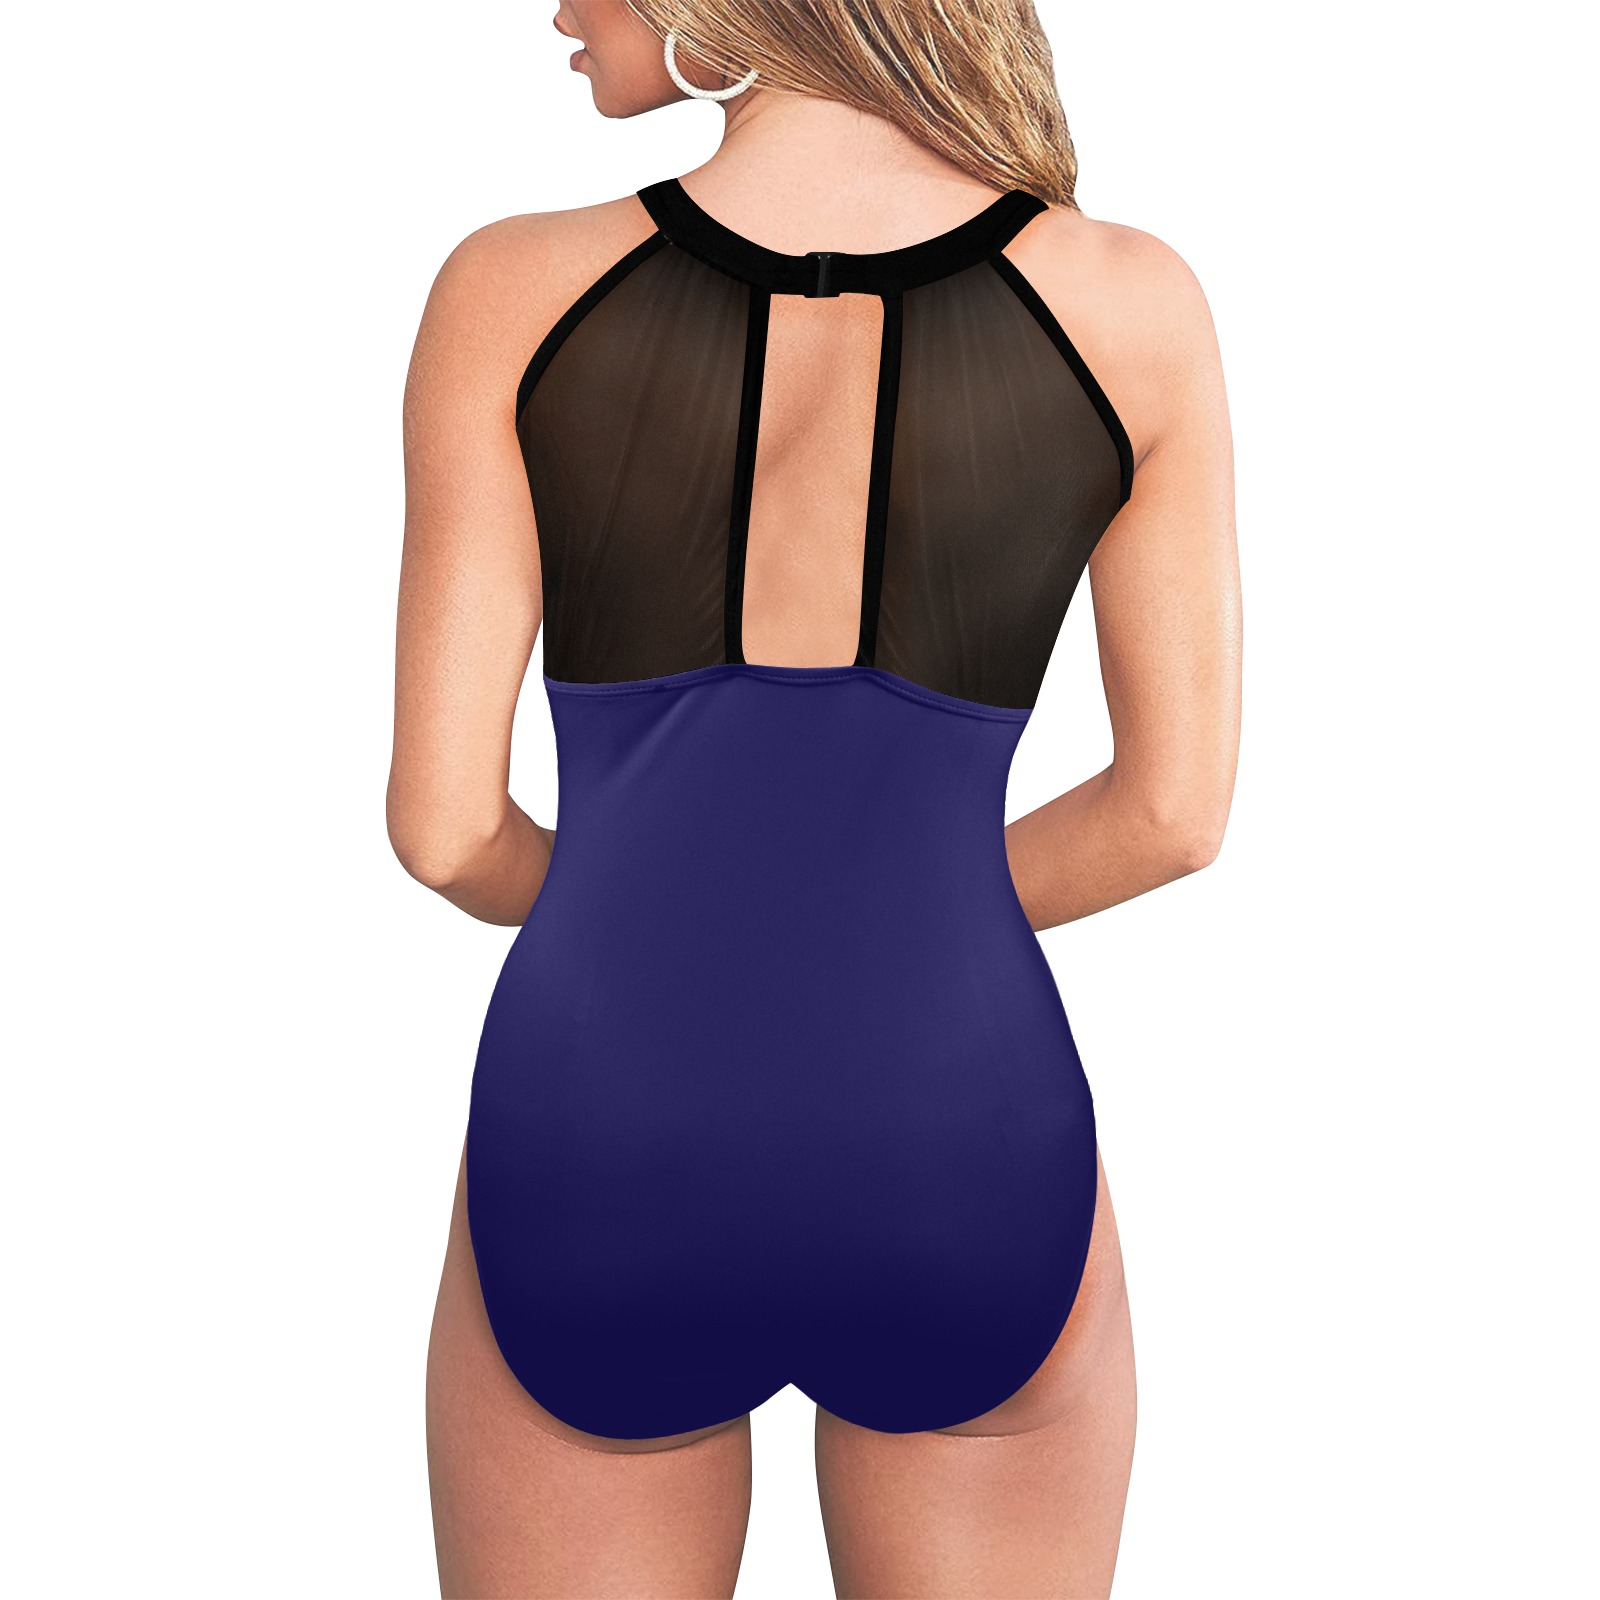 The moms suit logo on side Women's High Neck Plunge Mesh Ruched Swimsuit (S43)